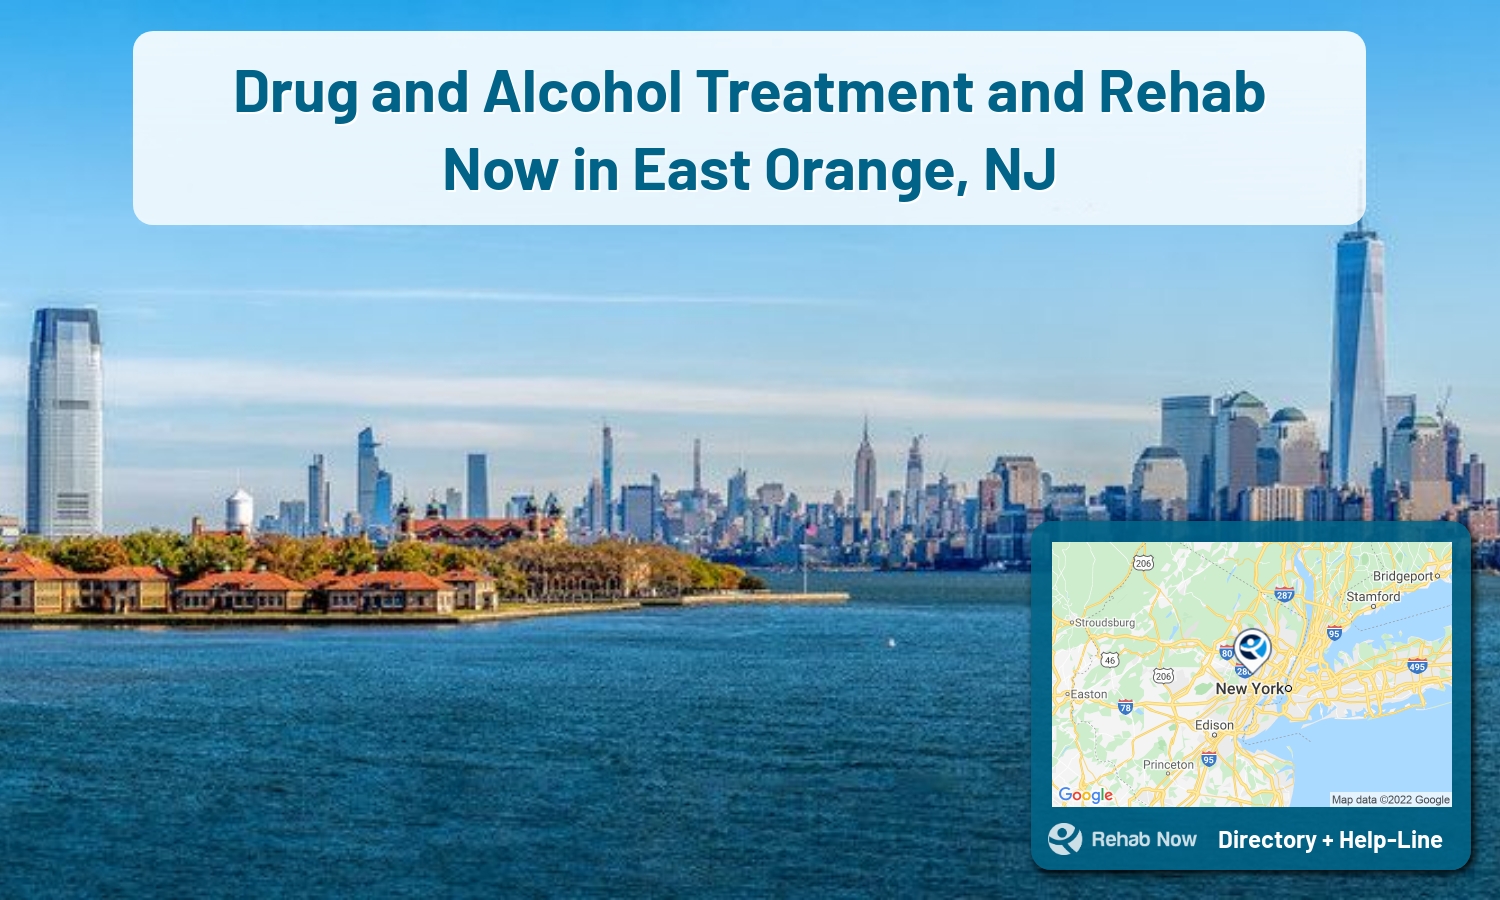 View options, availability, treatment methods, and more, for drug rehab and alcohol treatment in East Orange, New Jersey